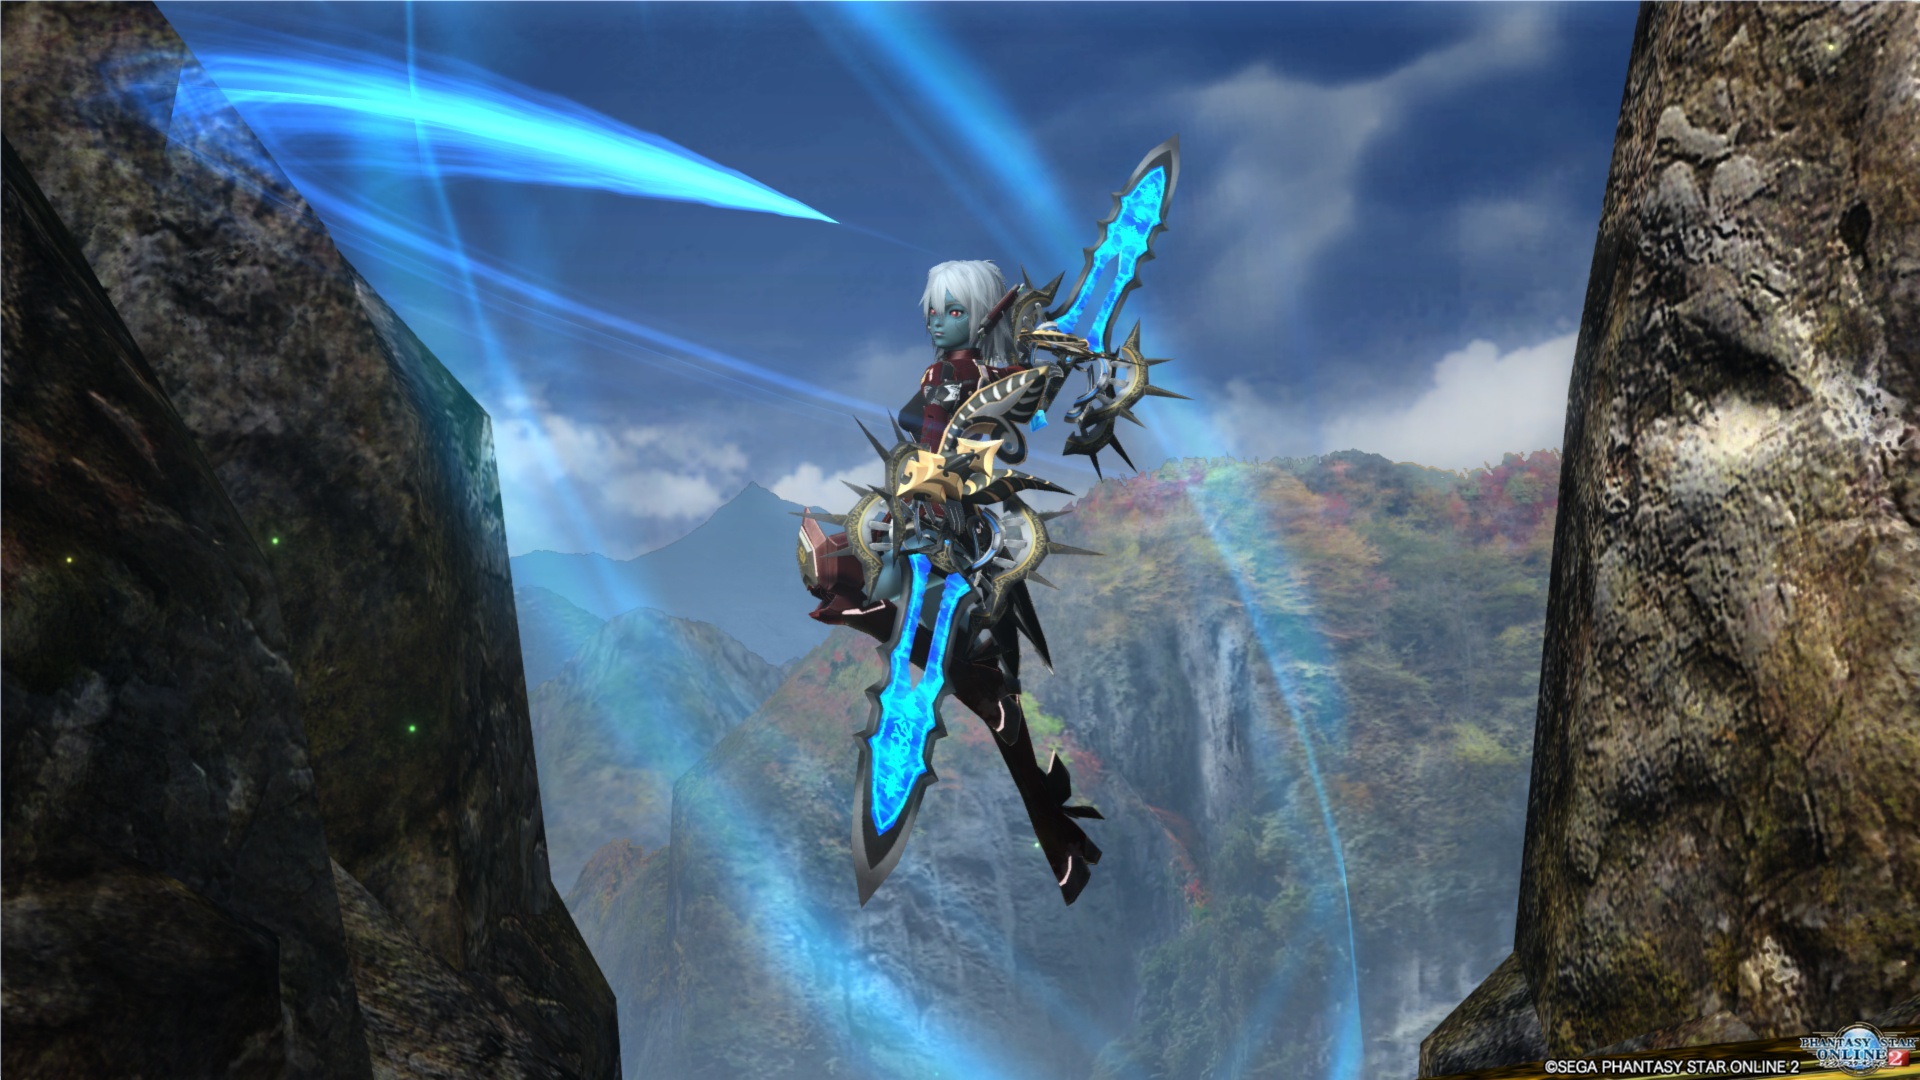 Pso2 Dual Blade Bouncer Guide Pt - Pso2 Dual Blades , HD Wallpaper & Backgrounds